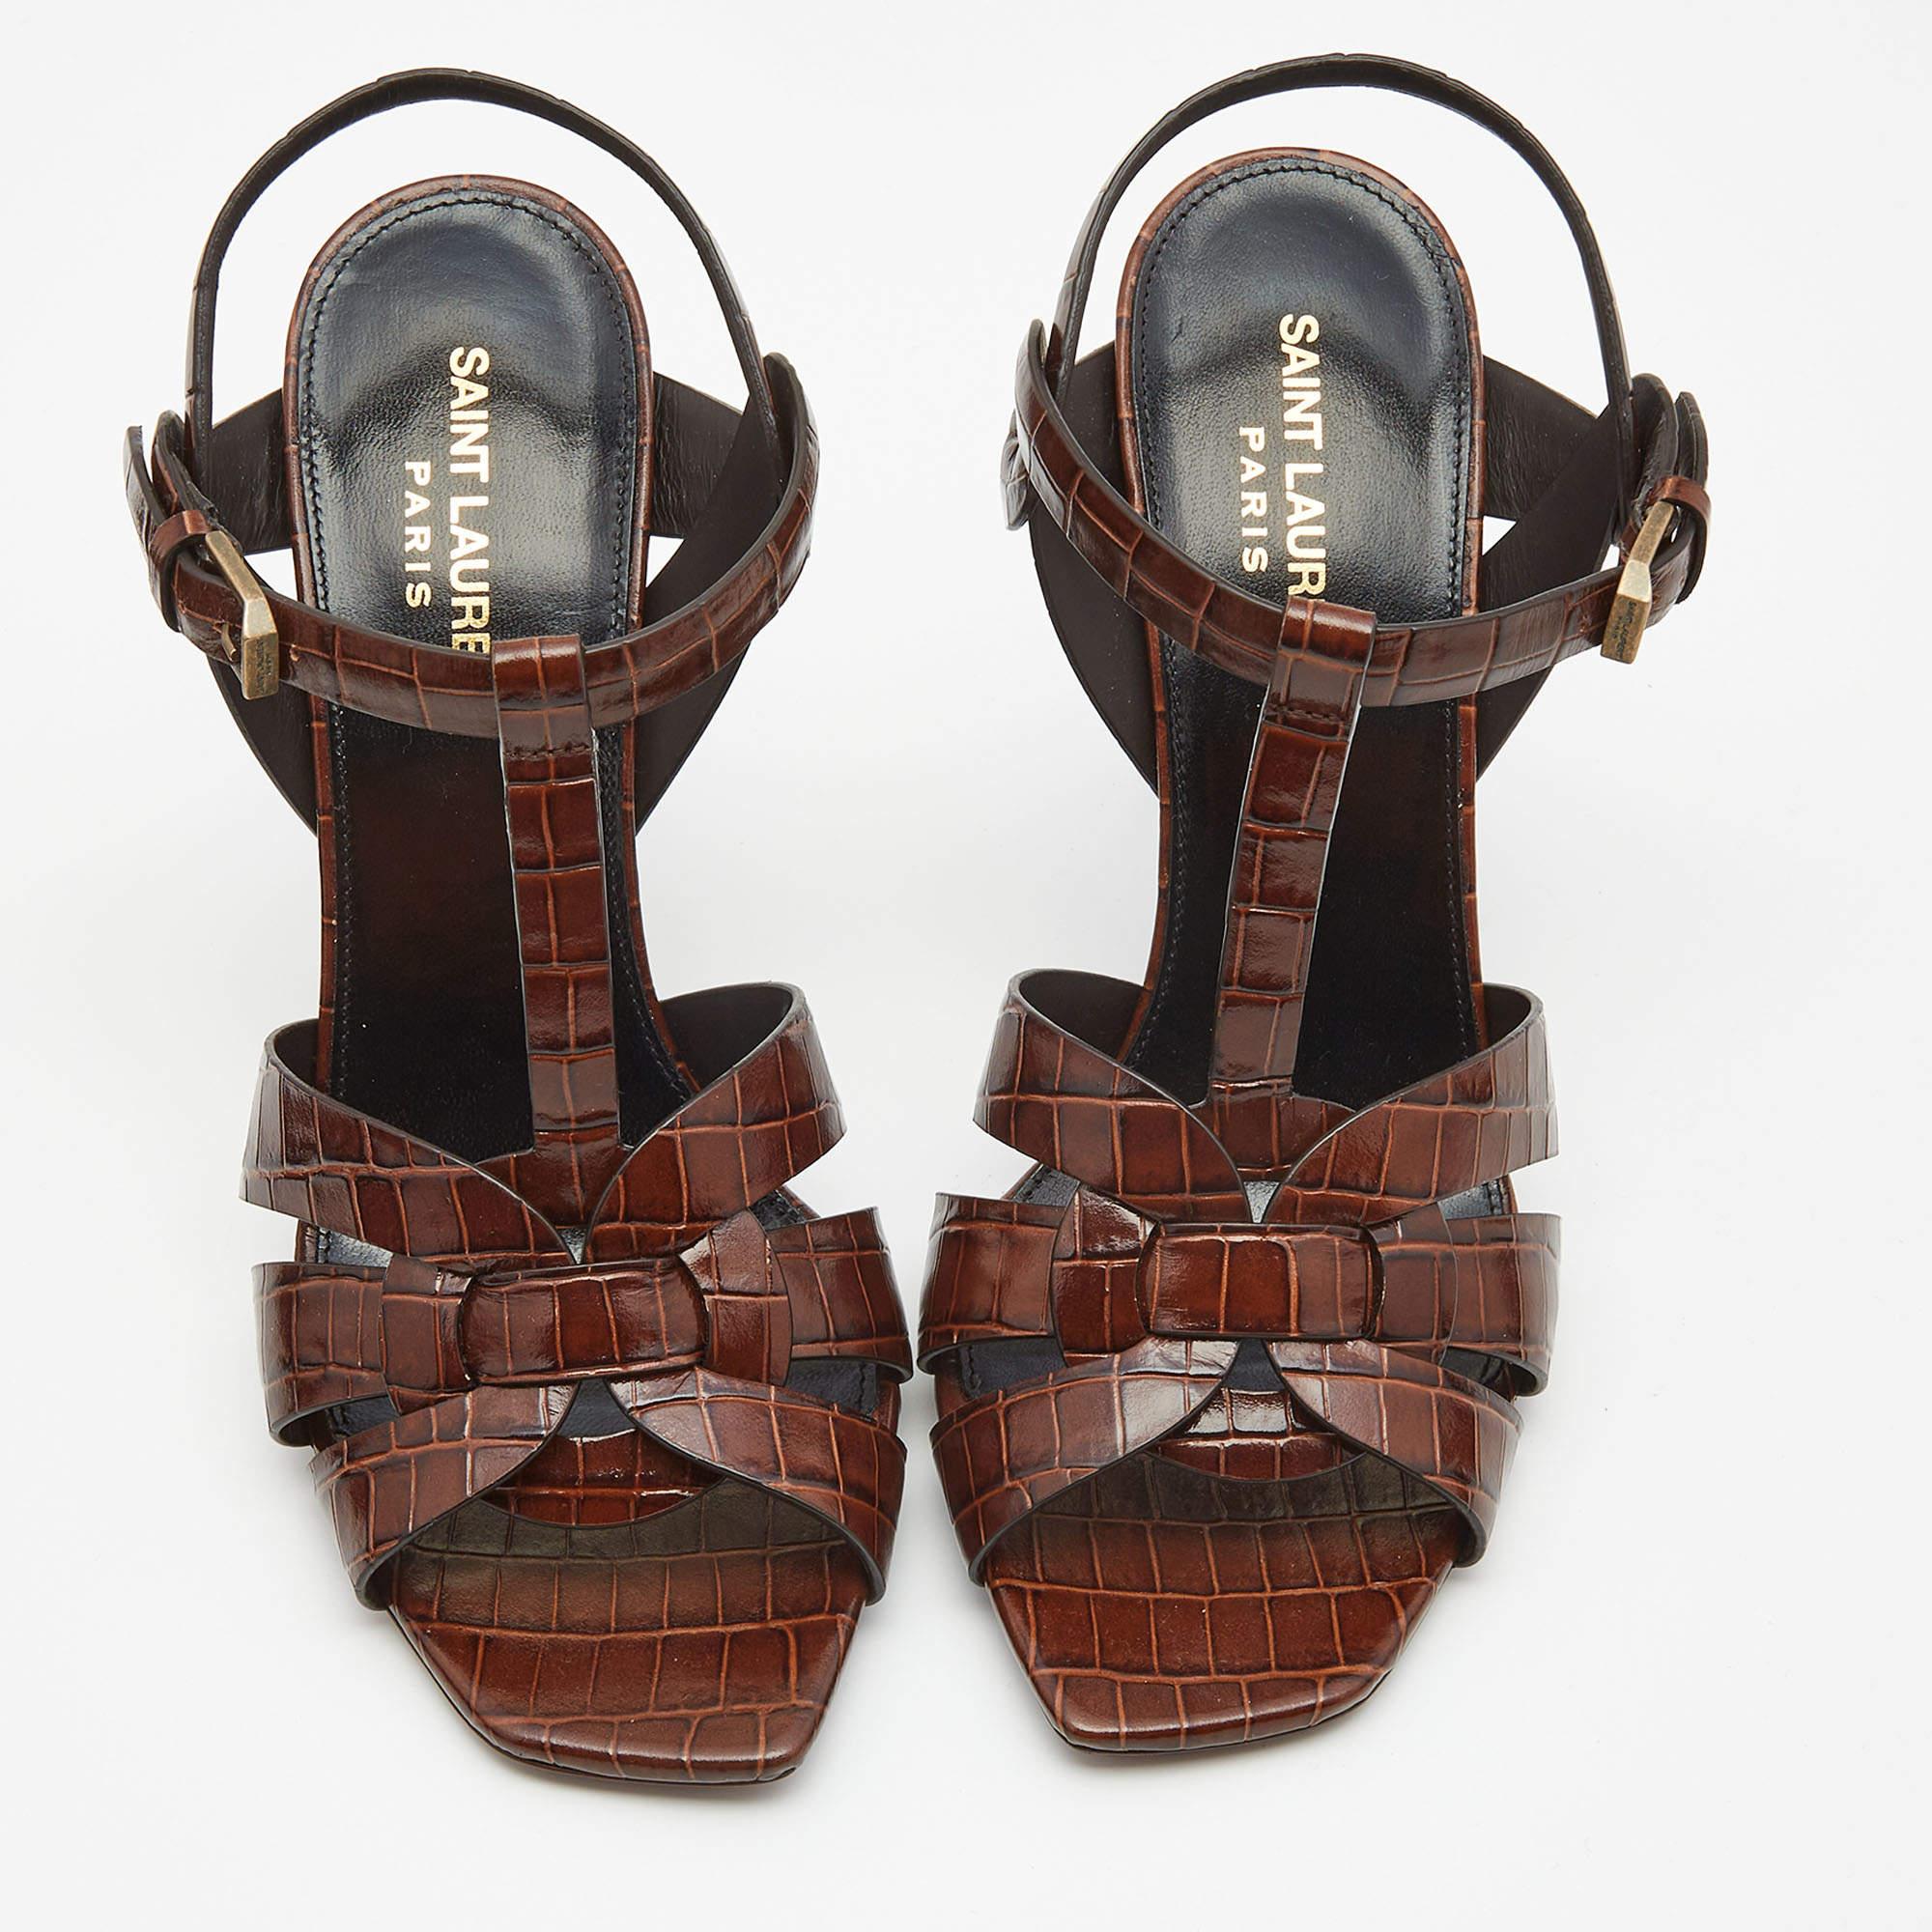 A timeless aesthetic and stellar craftsmanship in shoemaking are evident in these Saint Laurent platform sandals. From their interwoven construction using croc-embossed leather to the sturdy heel, these brown-hued Tribute sandals can be styled with